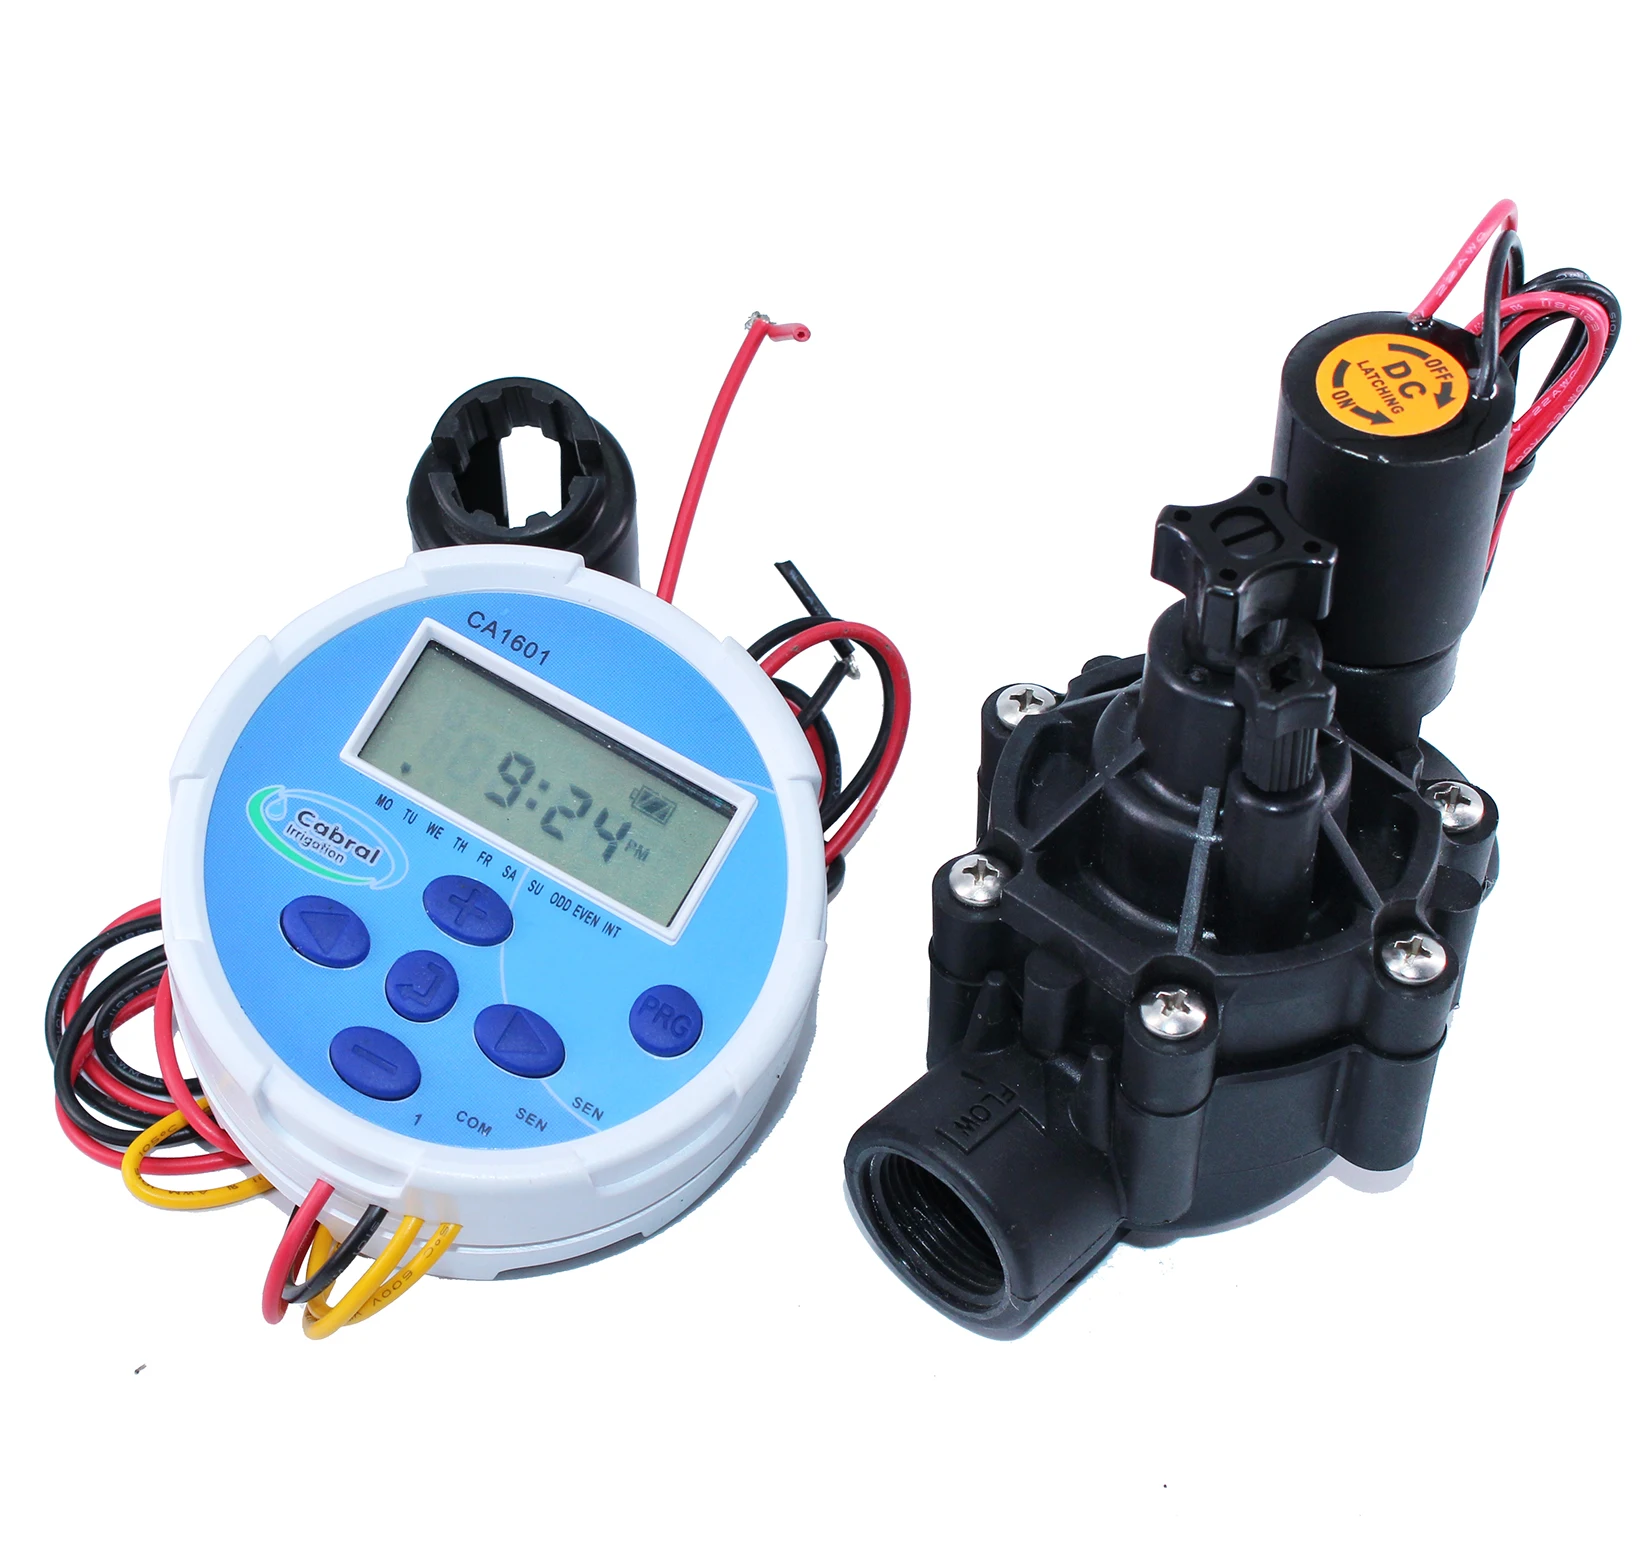 zanchen Sprinkler ca1601 VALVE   Single Station Controller with DC Latching Solenoid and 101DH  1inch Valve